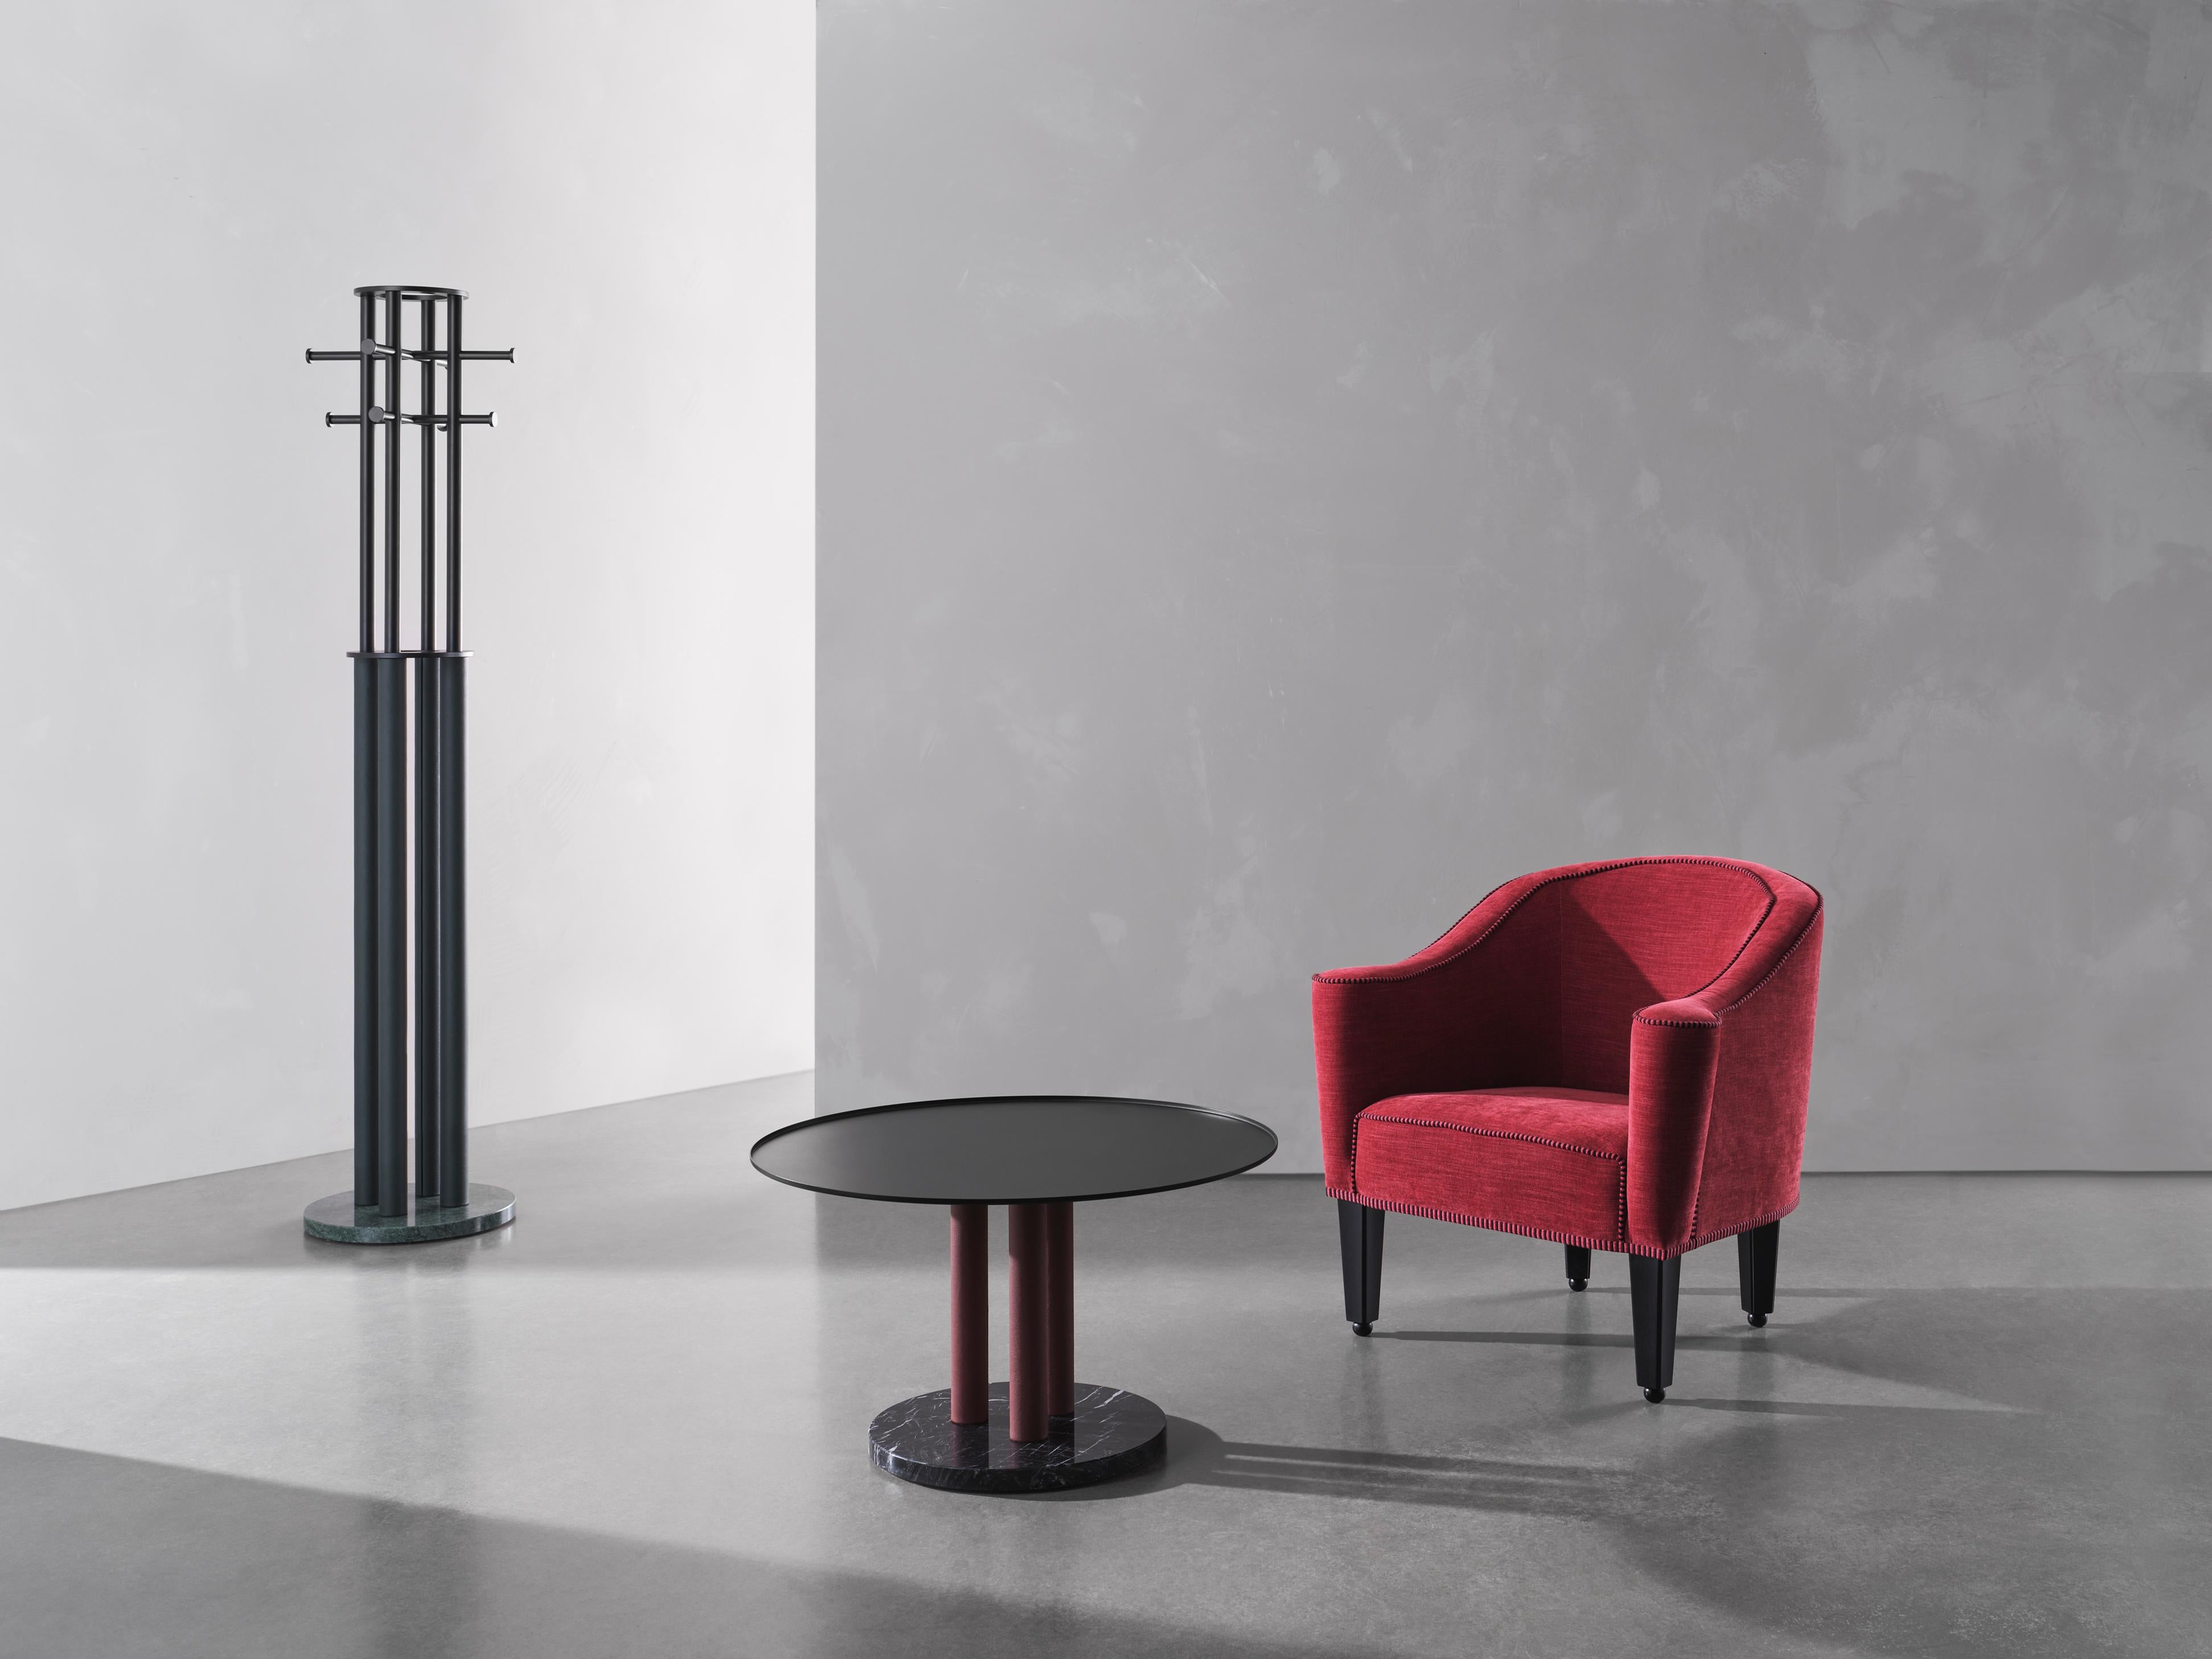 The shapes of BATON feel very familiar. They bring to mind historic Vienna – a reference that is quite deliberate: the collection is inspired by the zeitgeist of the Secessionist movement, a collective of painters, sculptors and designers who were